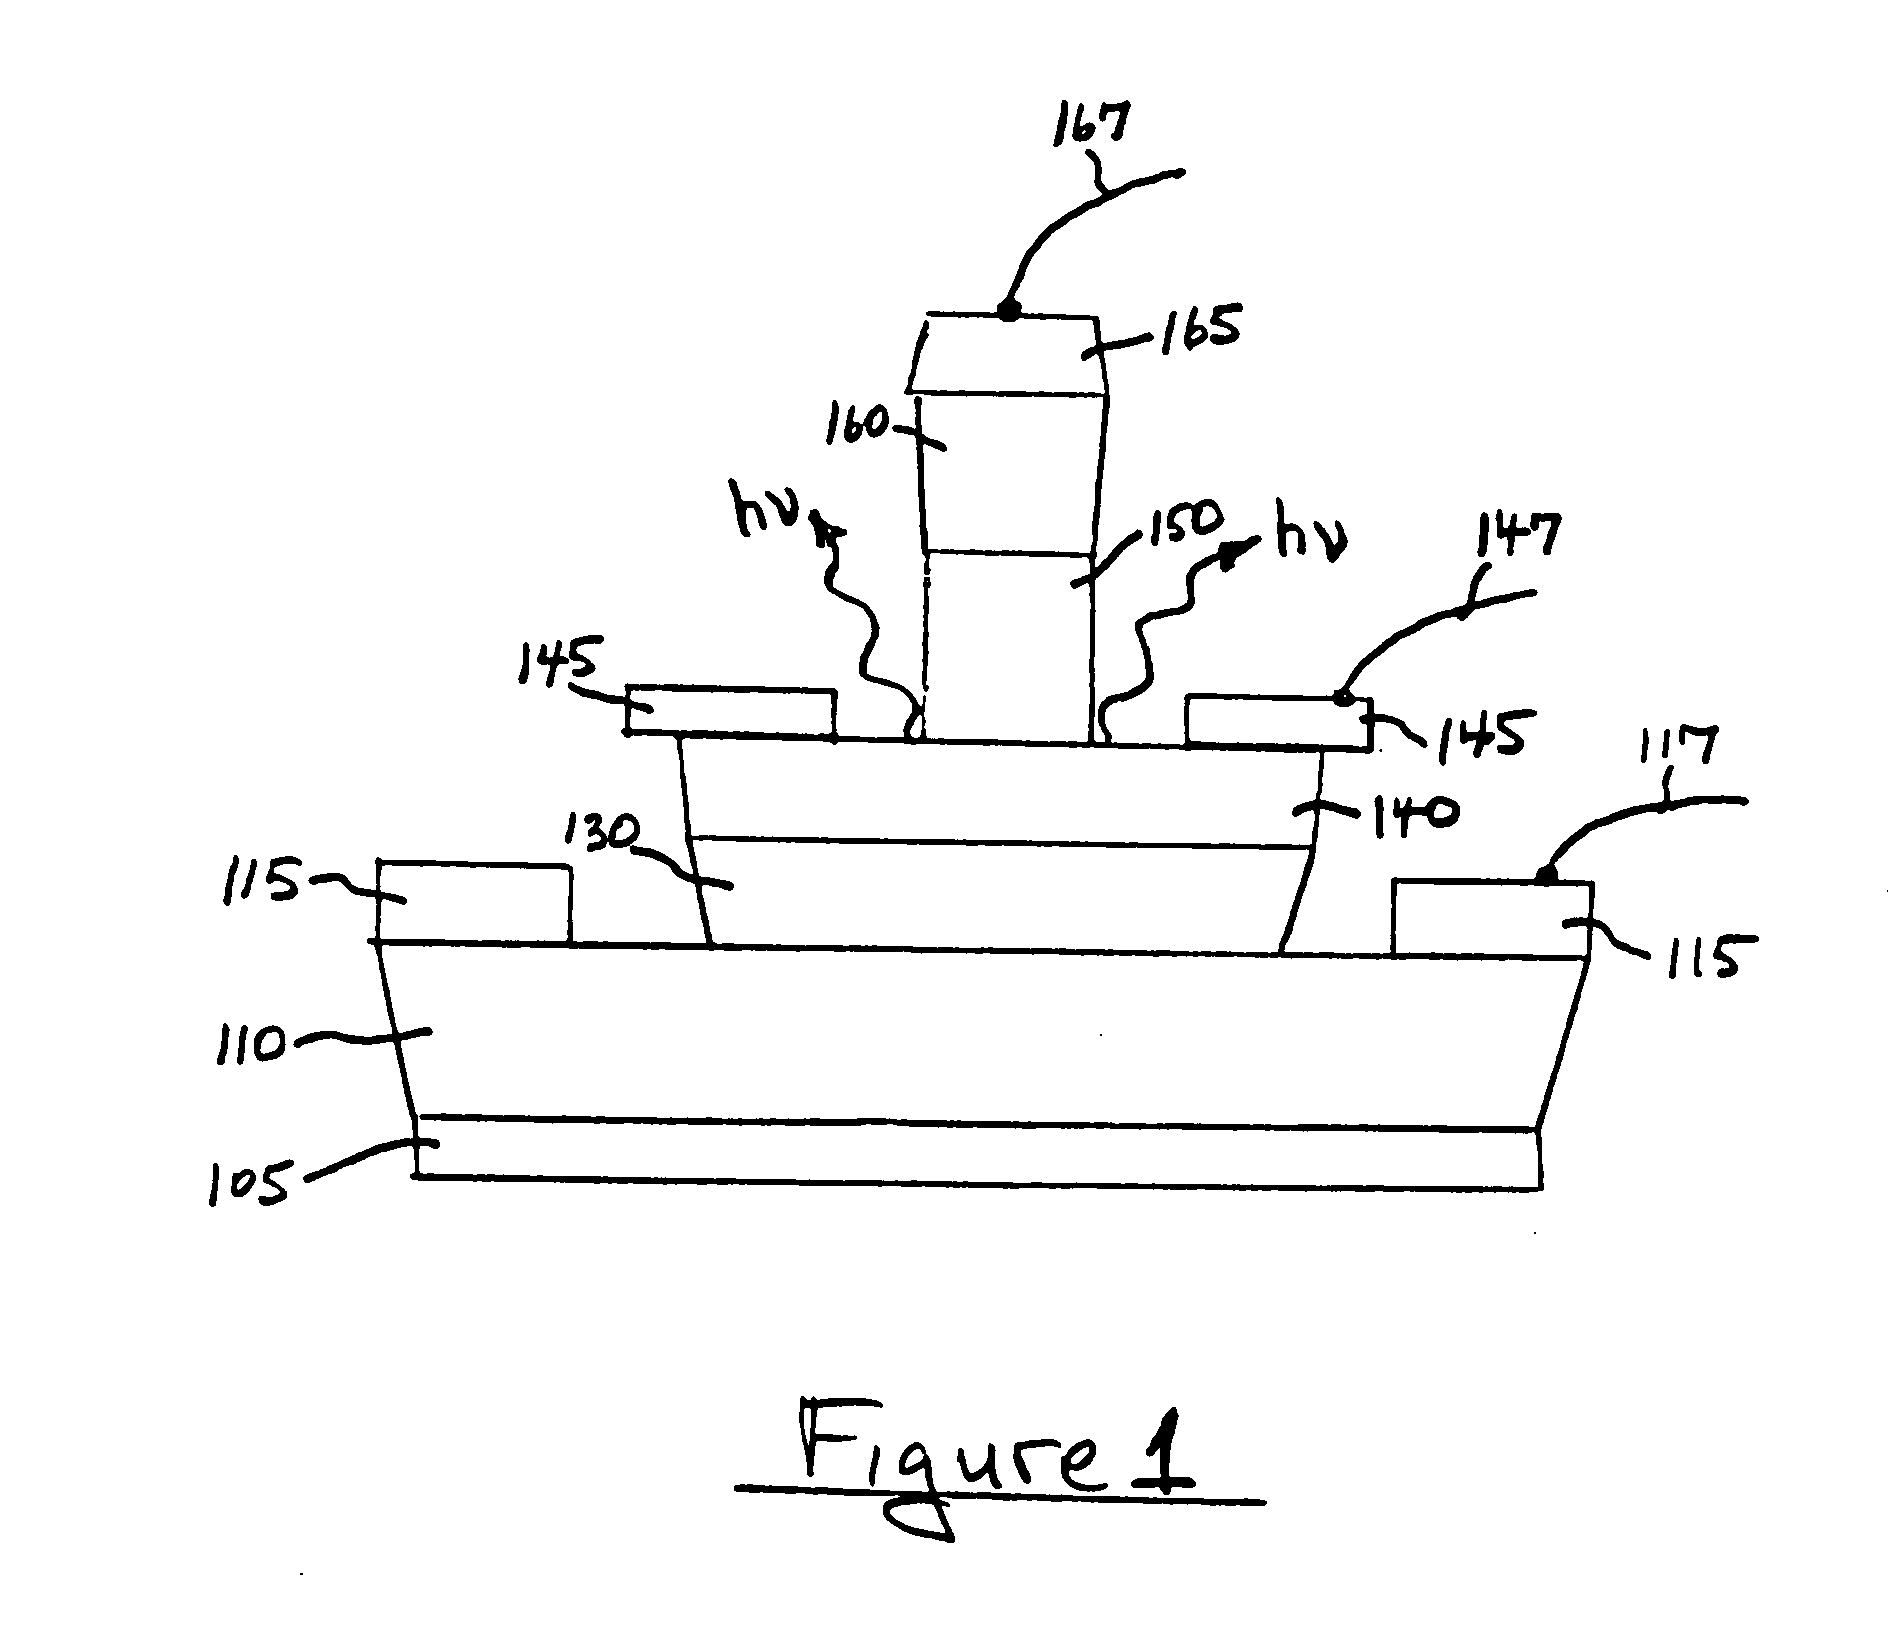 Method for increasing the speed of a light emitting biopolar transistor device